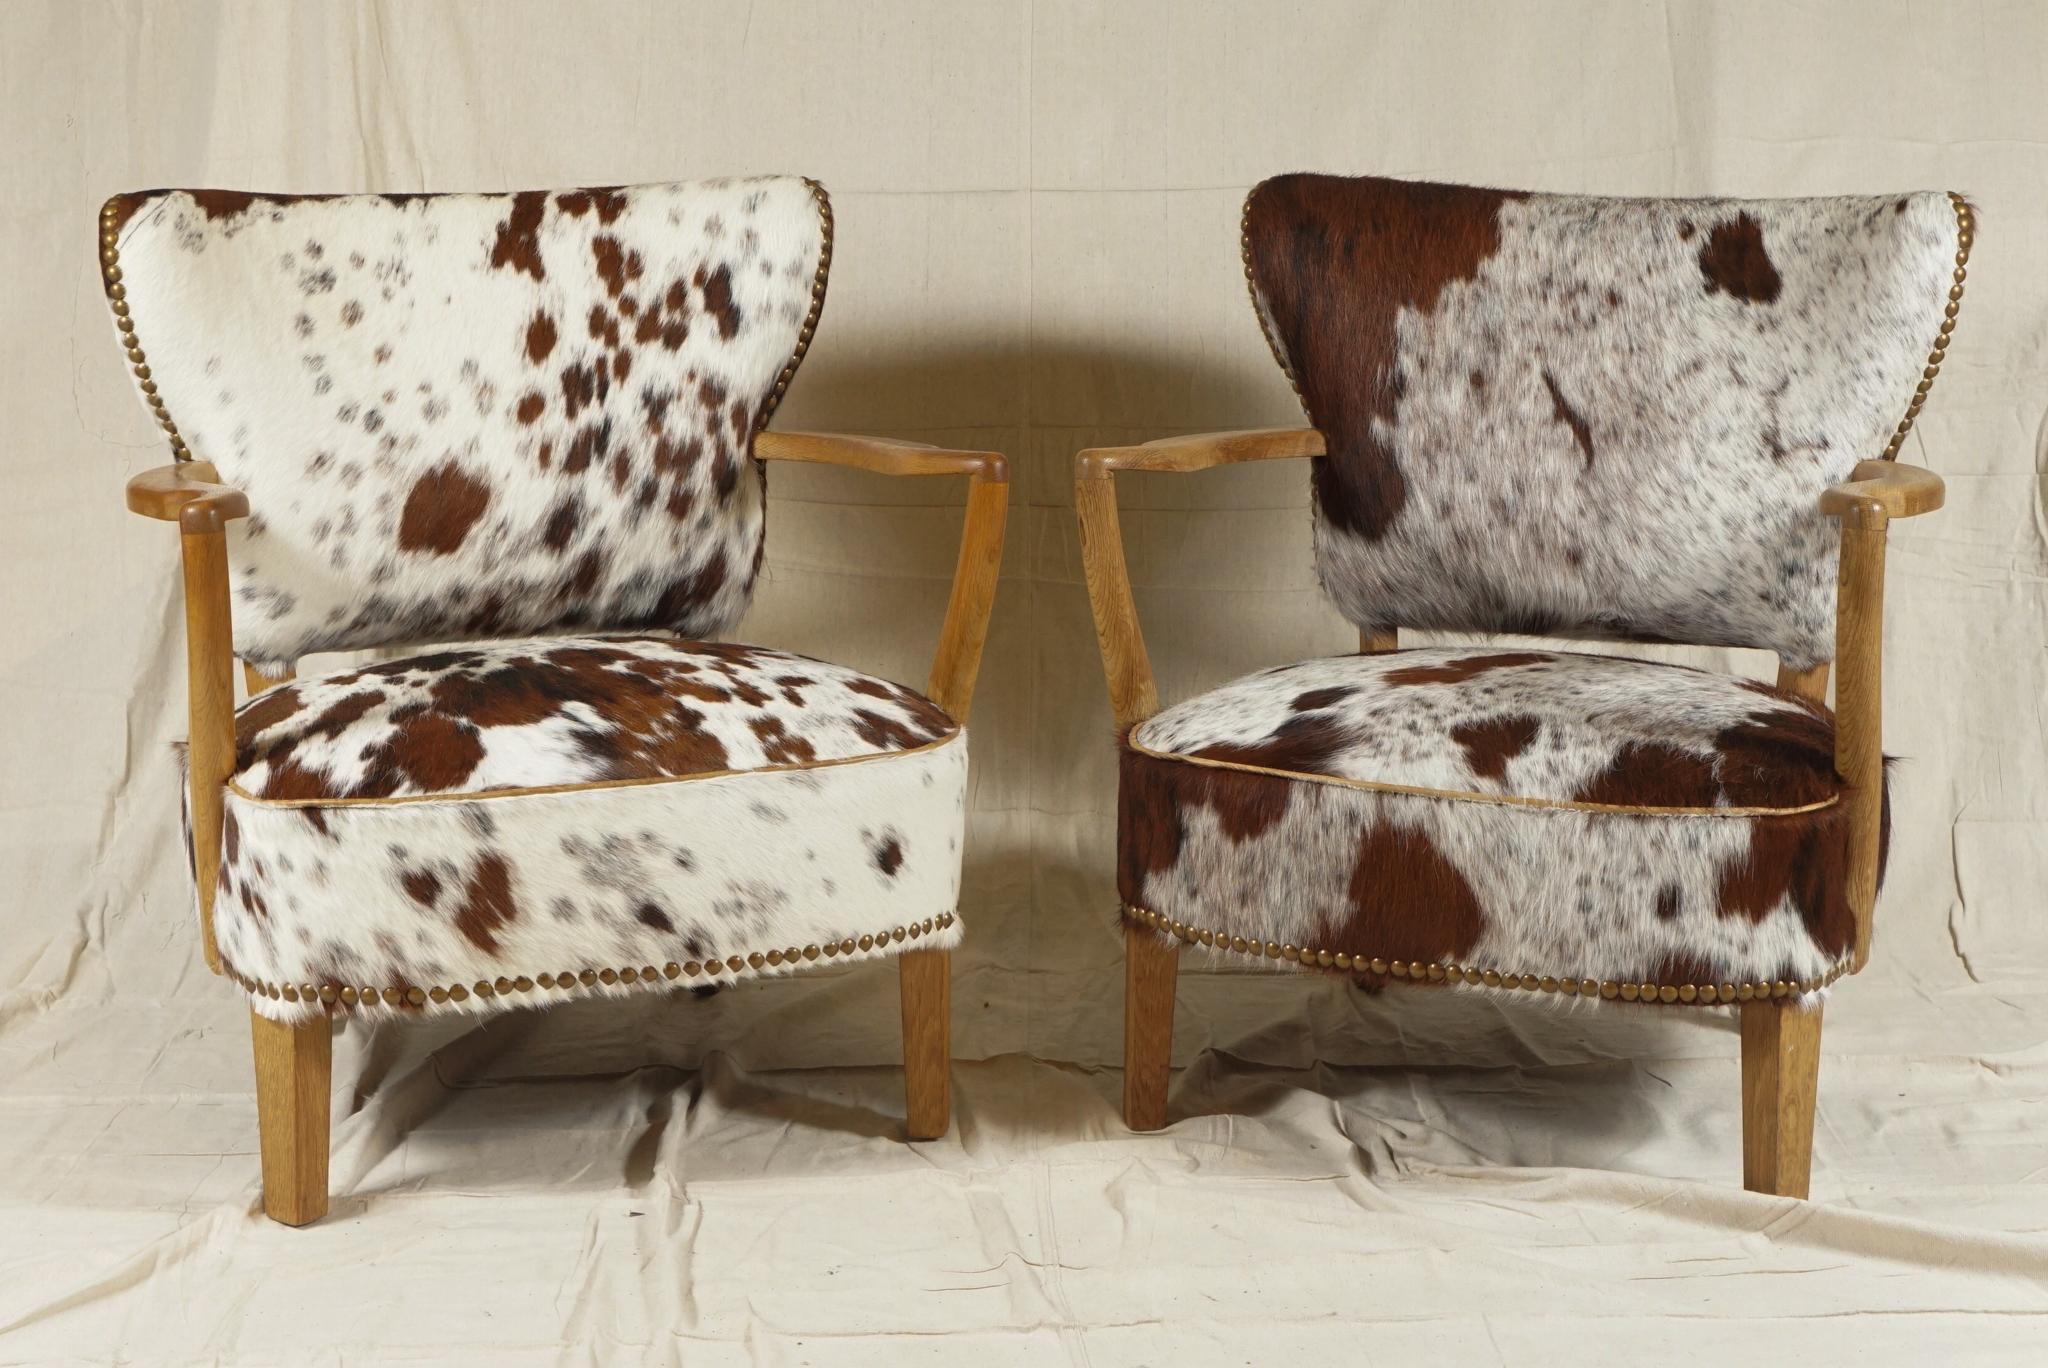 Delightful pair of Danish modern cabinet-maker armchairs, by S. Thrane & Søn, Odense, with stylishly curved open arms and slightly curved back, in light-colored oak, freshly upholstered in a multi-patterned, soft brown and white cowhide.